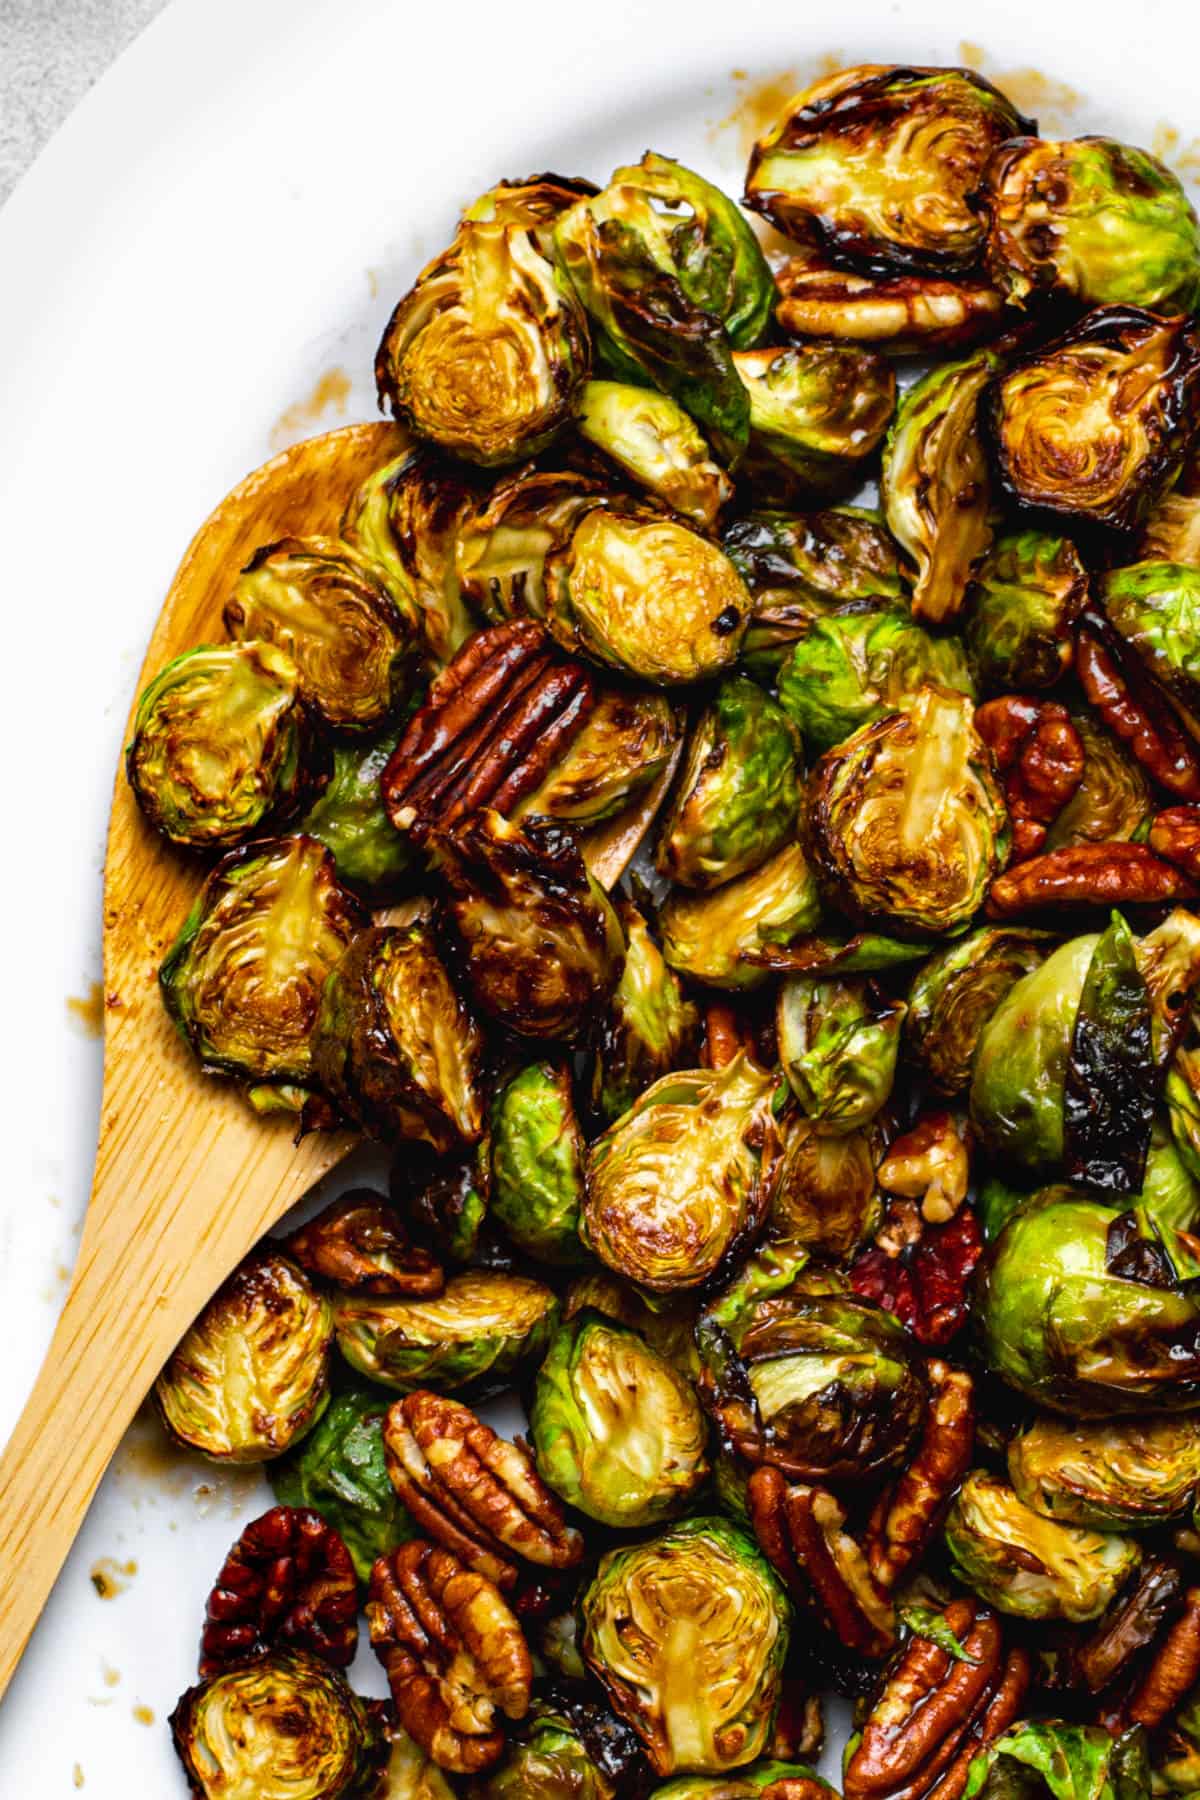 Maple balsamic glazed brussels sprouts on a platter with a wooden serving spoon.